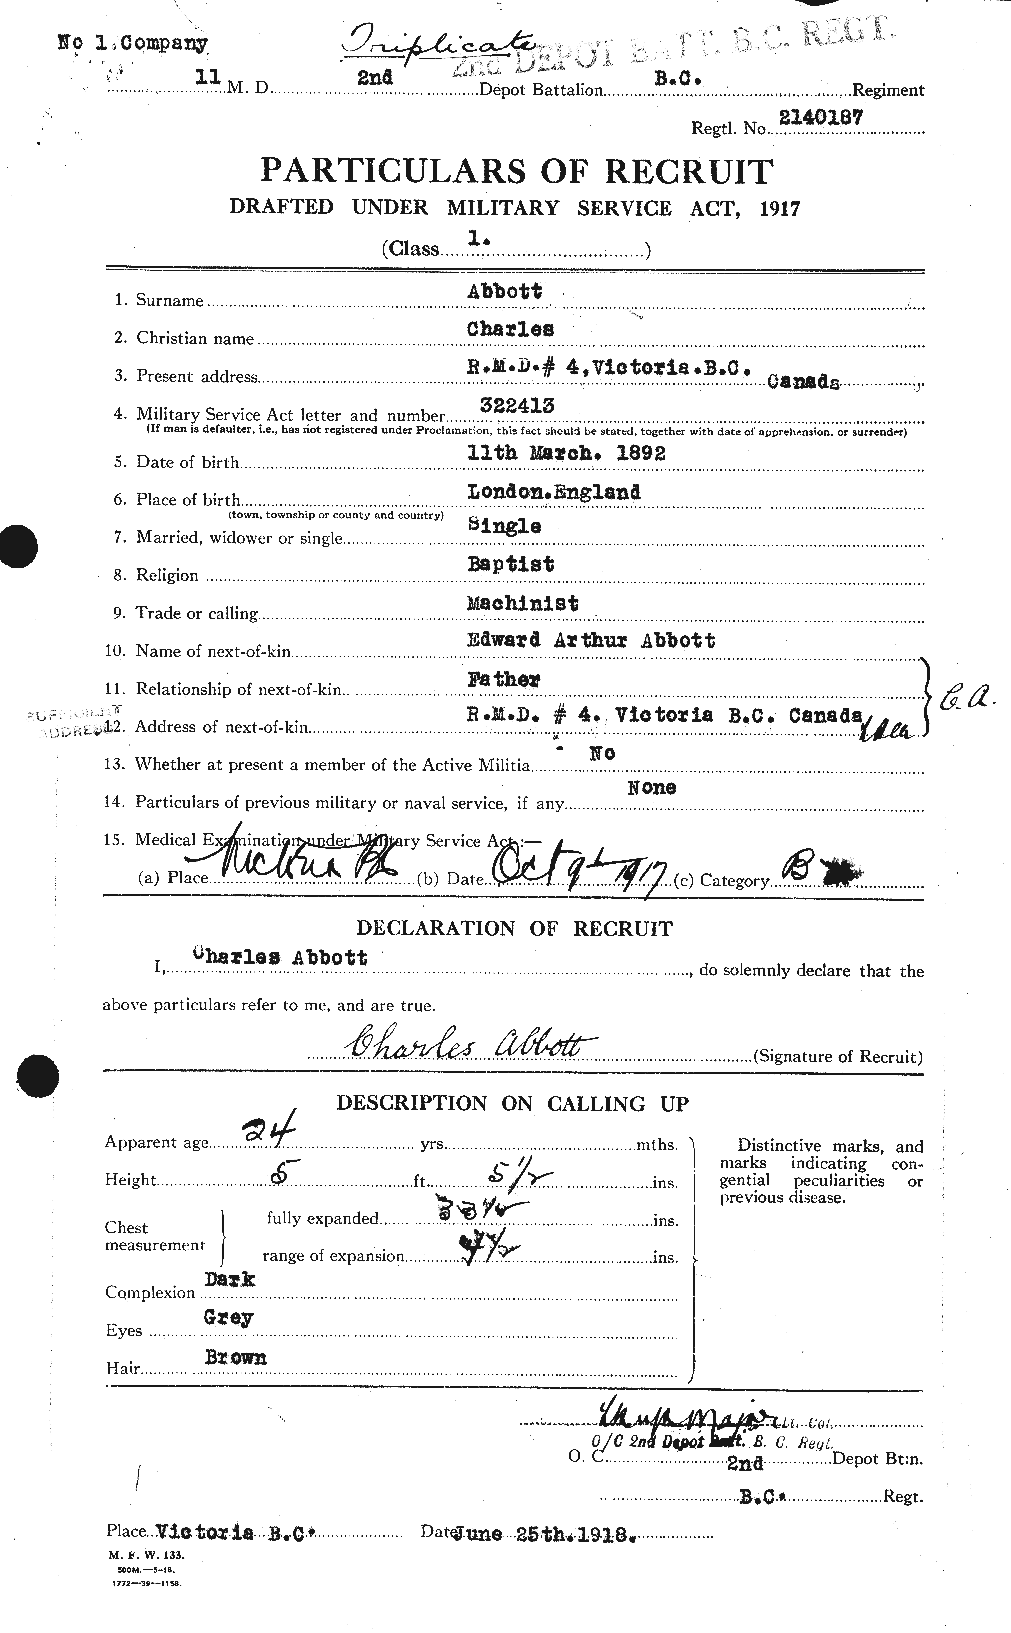 Personnel Records of the First World War - CEF 200833a